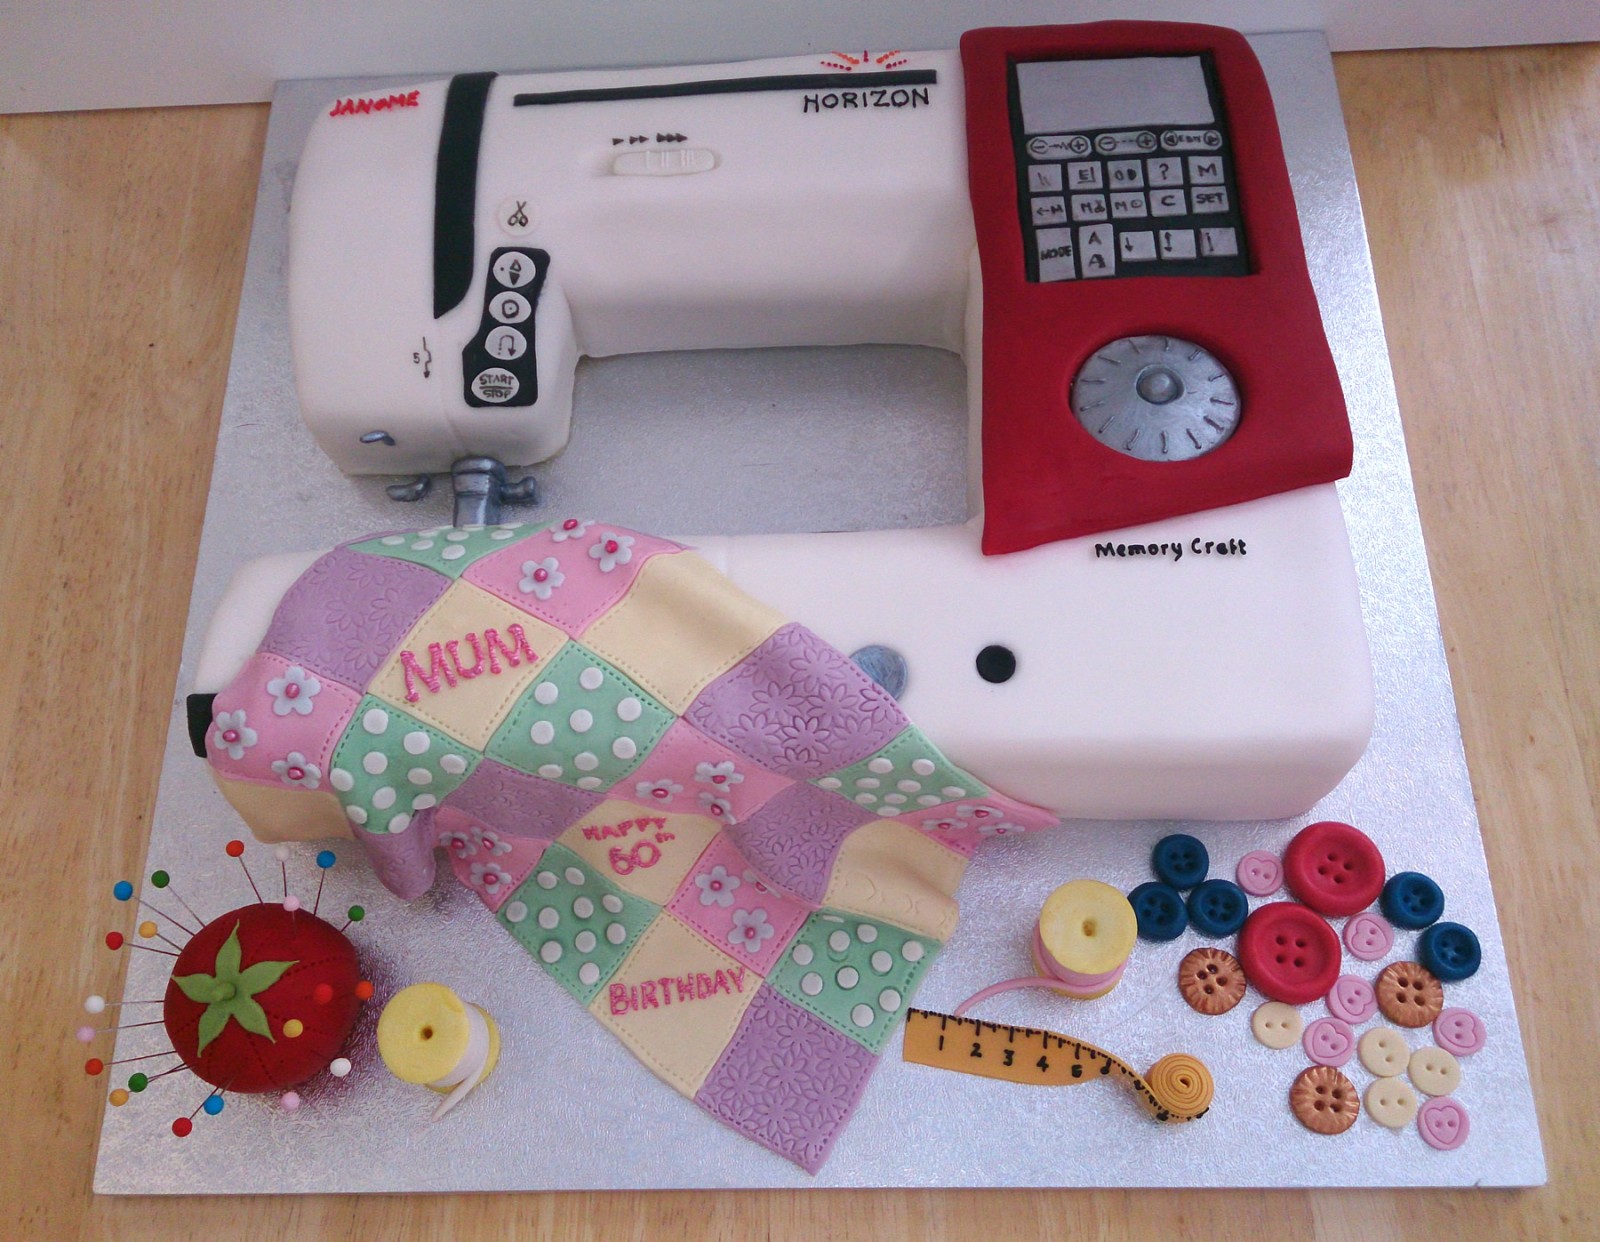 Sewing cake - Decorated Cake by Natalie Wells - CakesDecor